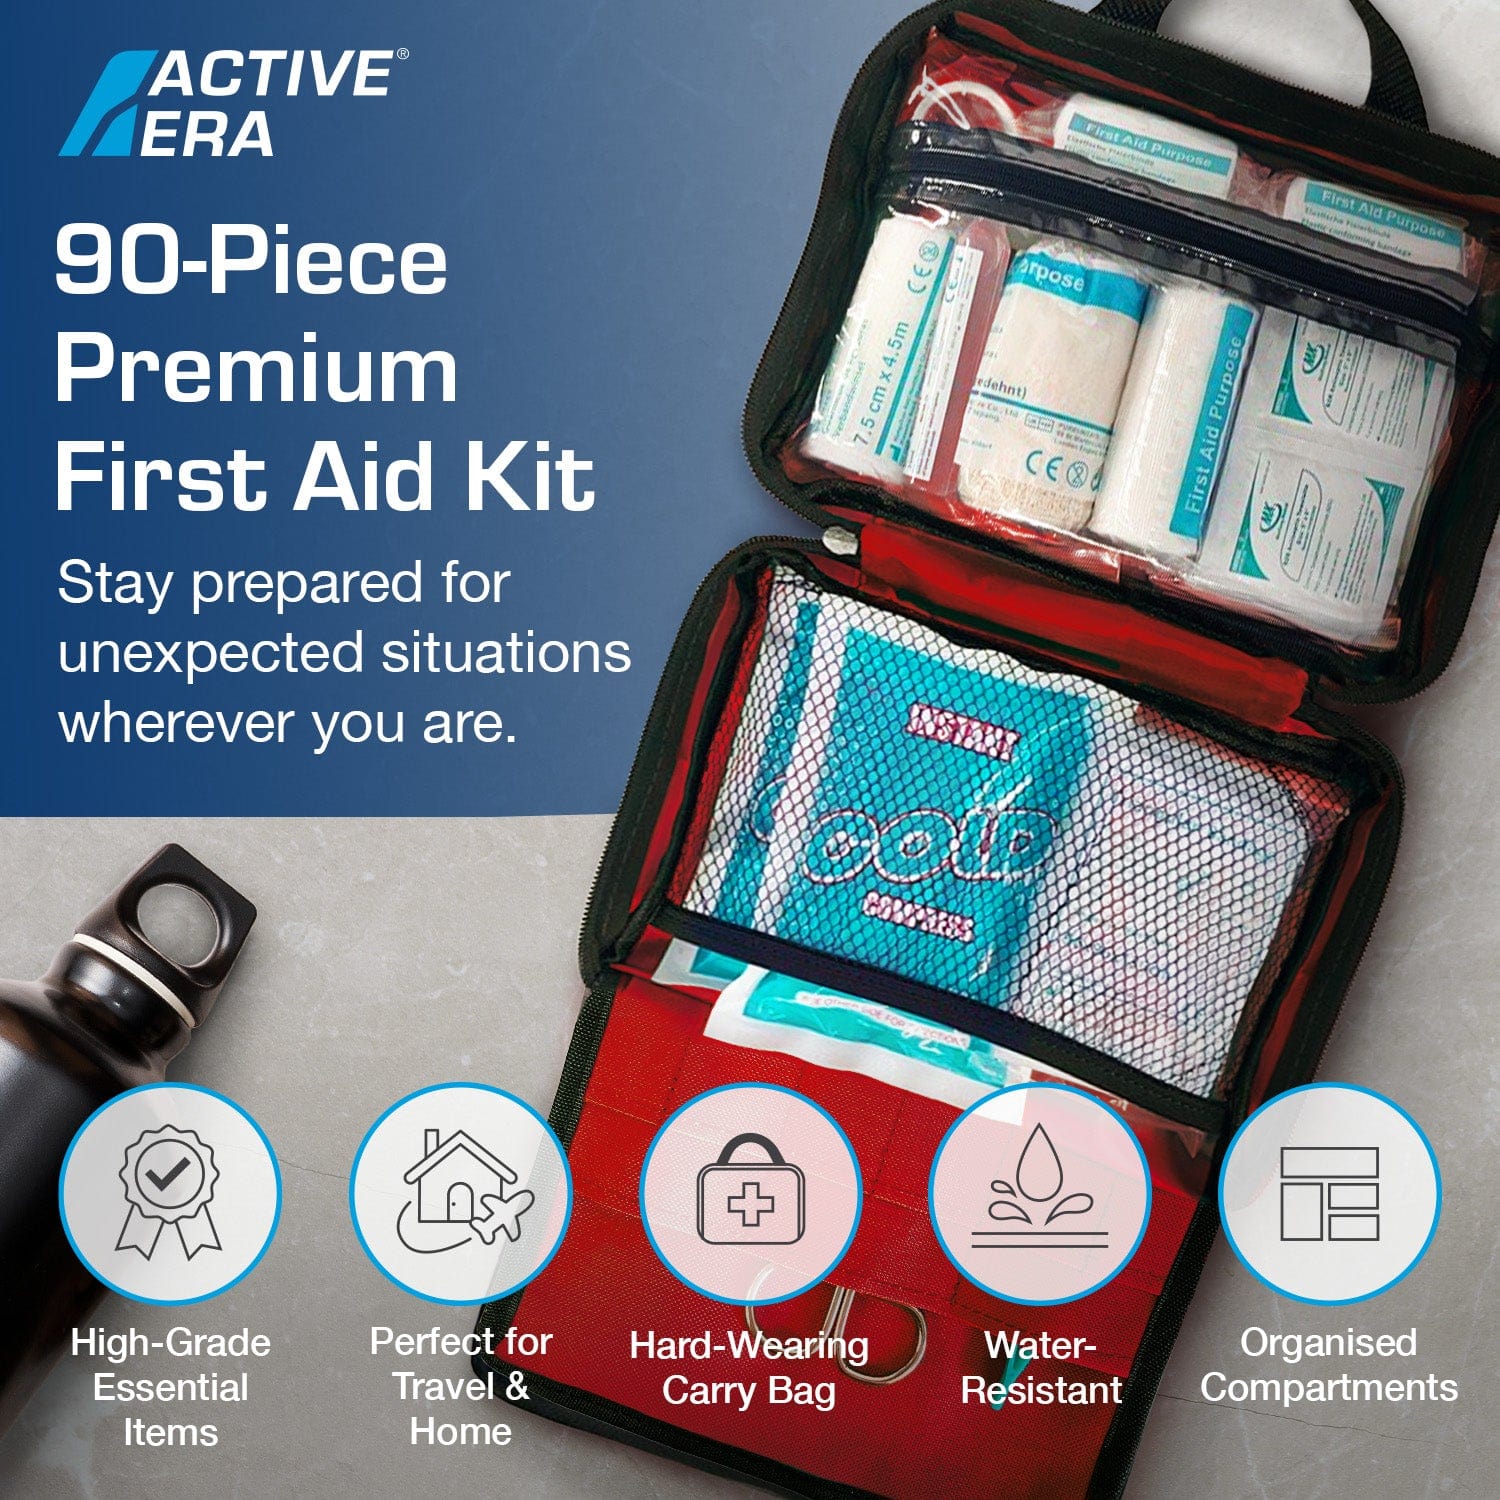 90 Piece Premium First Aid Kit Bag - Red